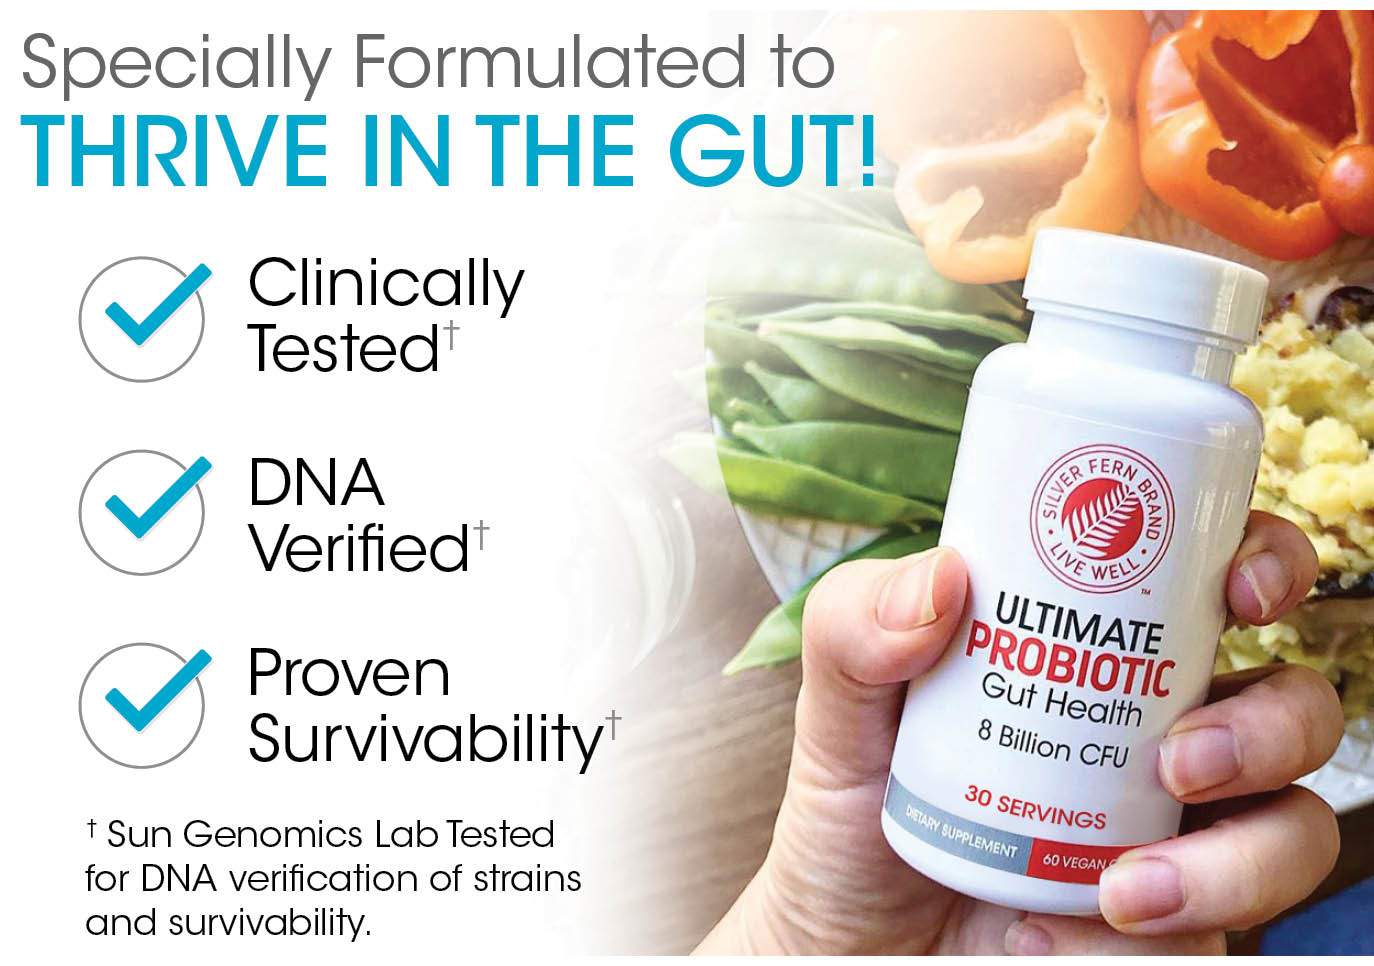 Gut Rehab - Cleanse Daily Detox and  the Ultimate Probiotic Combo